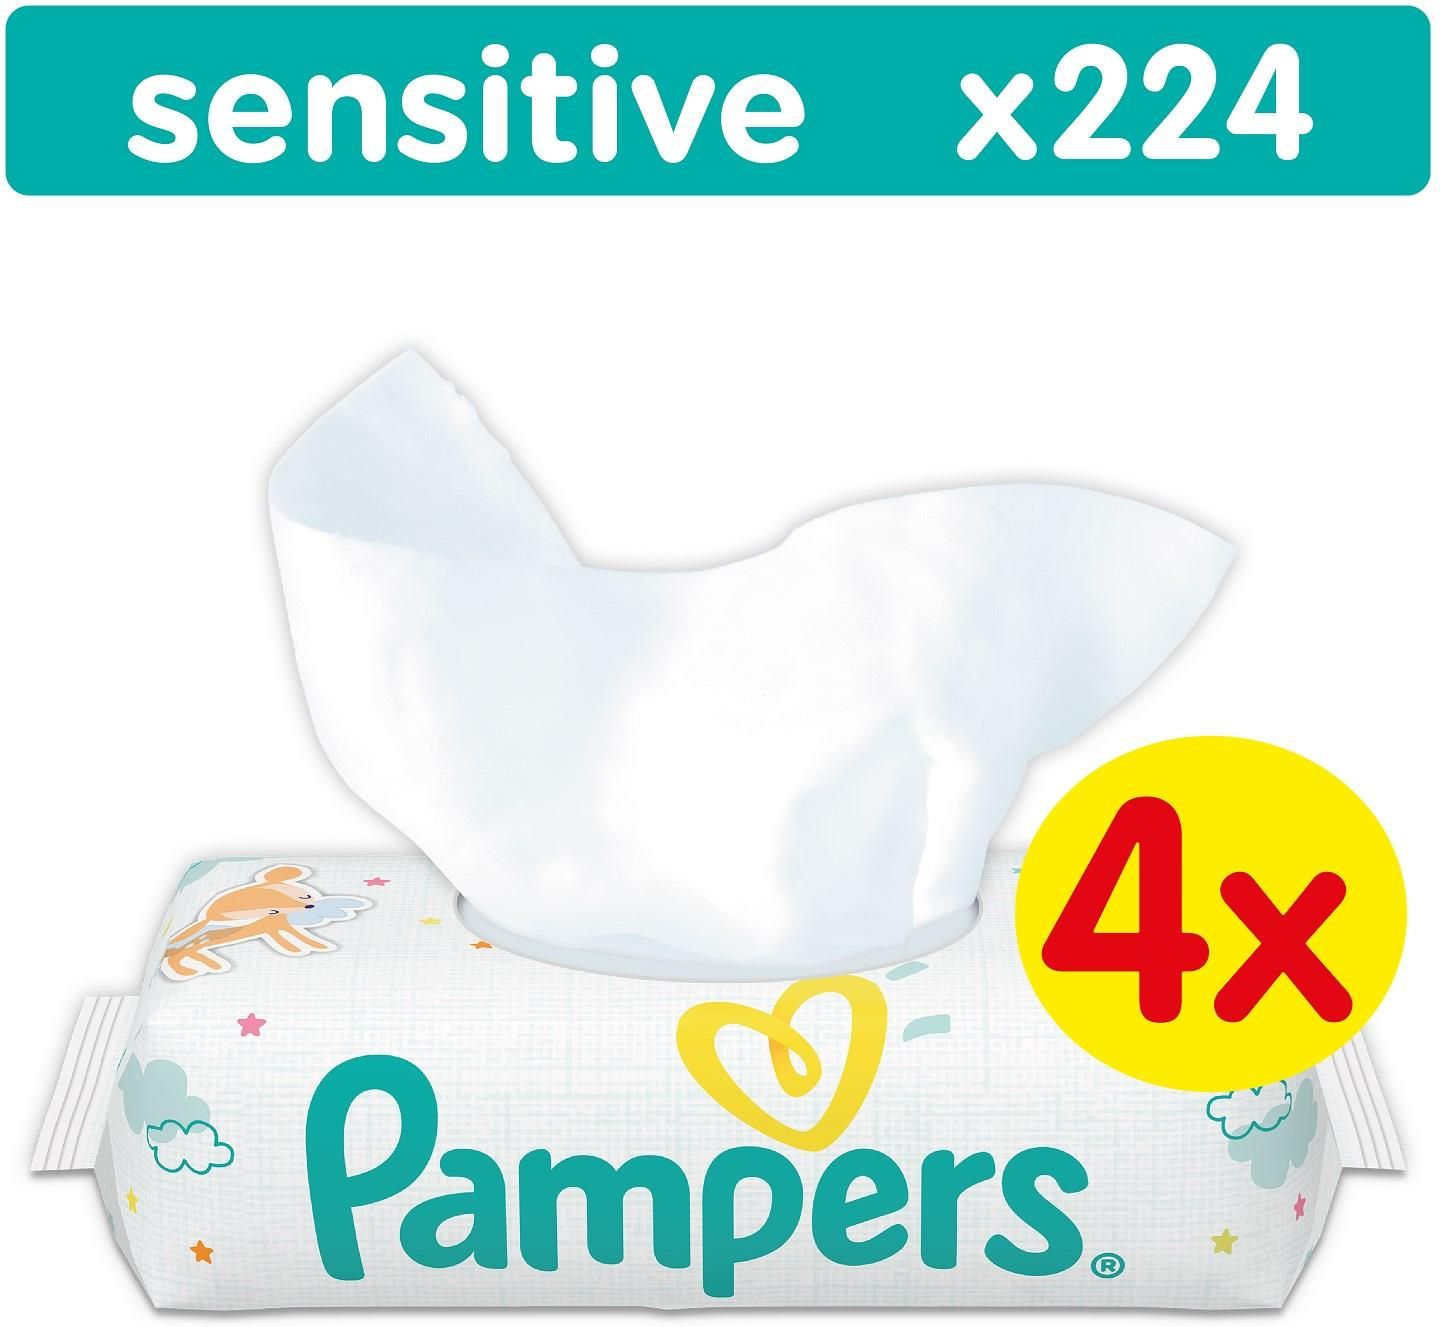 pampers actove baby dry opinie